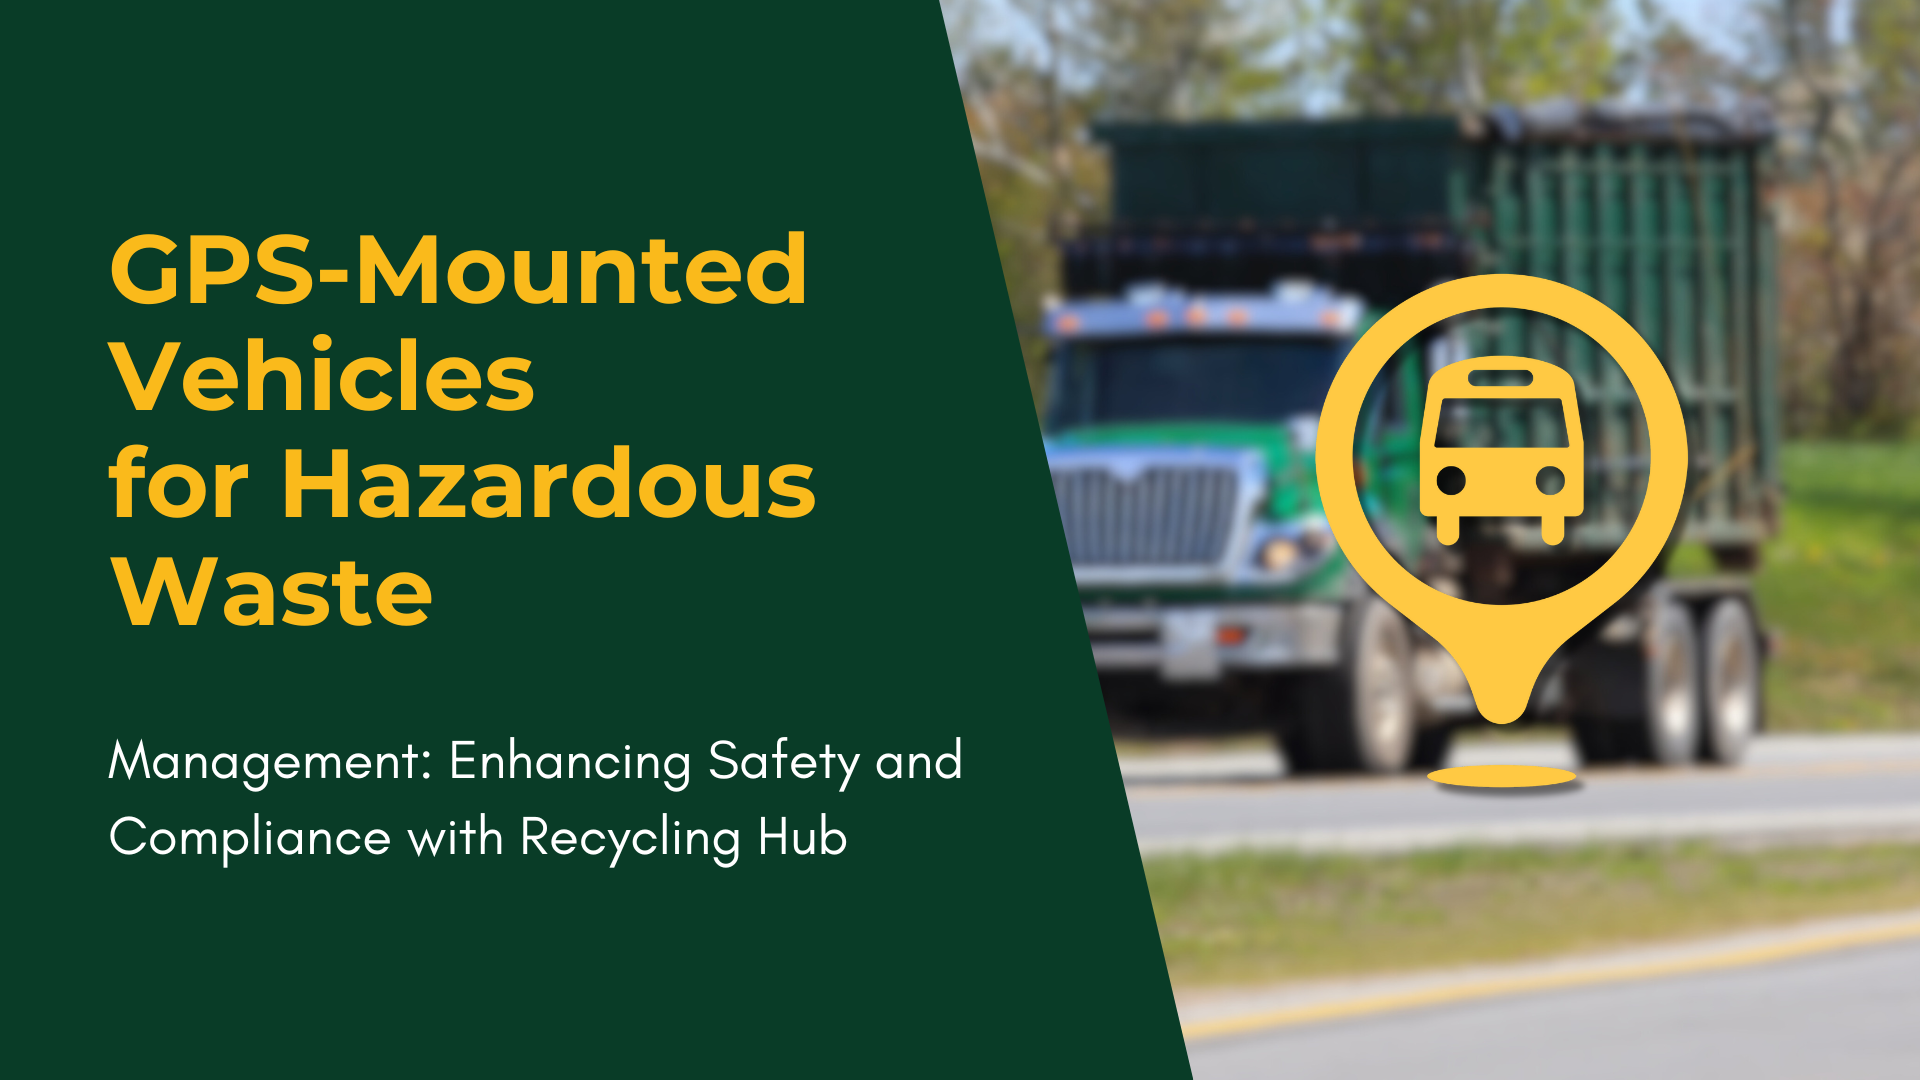 GPS-Mounted Vehicles for Hazardous Waste Management: Enhancing Safety and Compliance with Recycling Hub